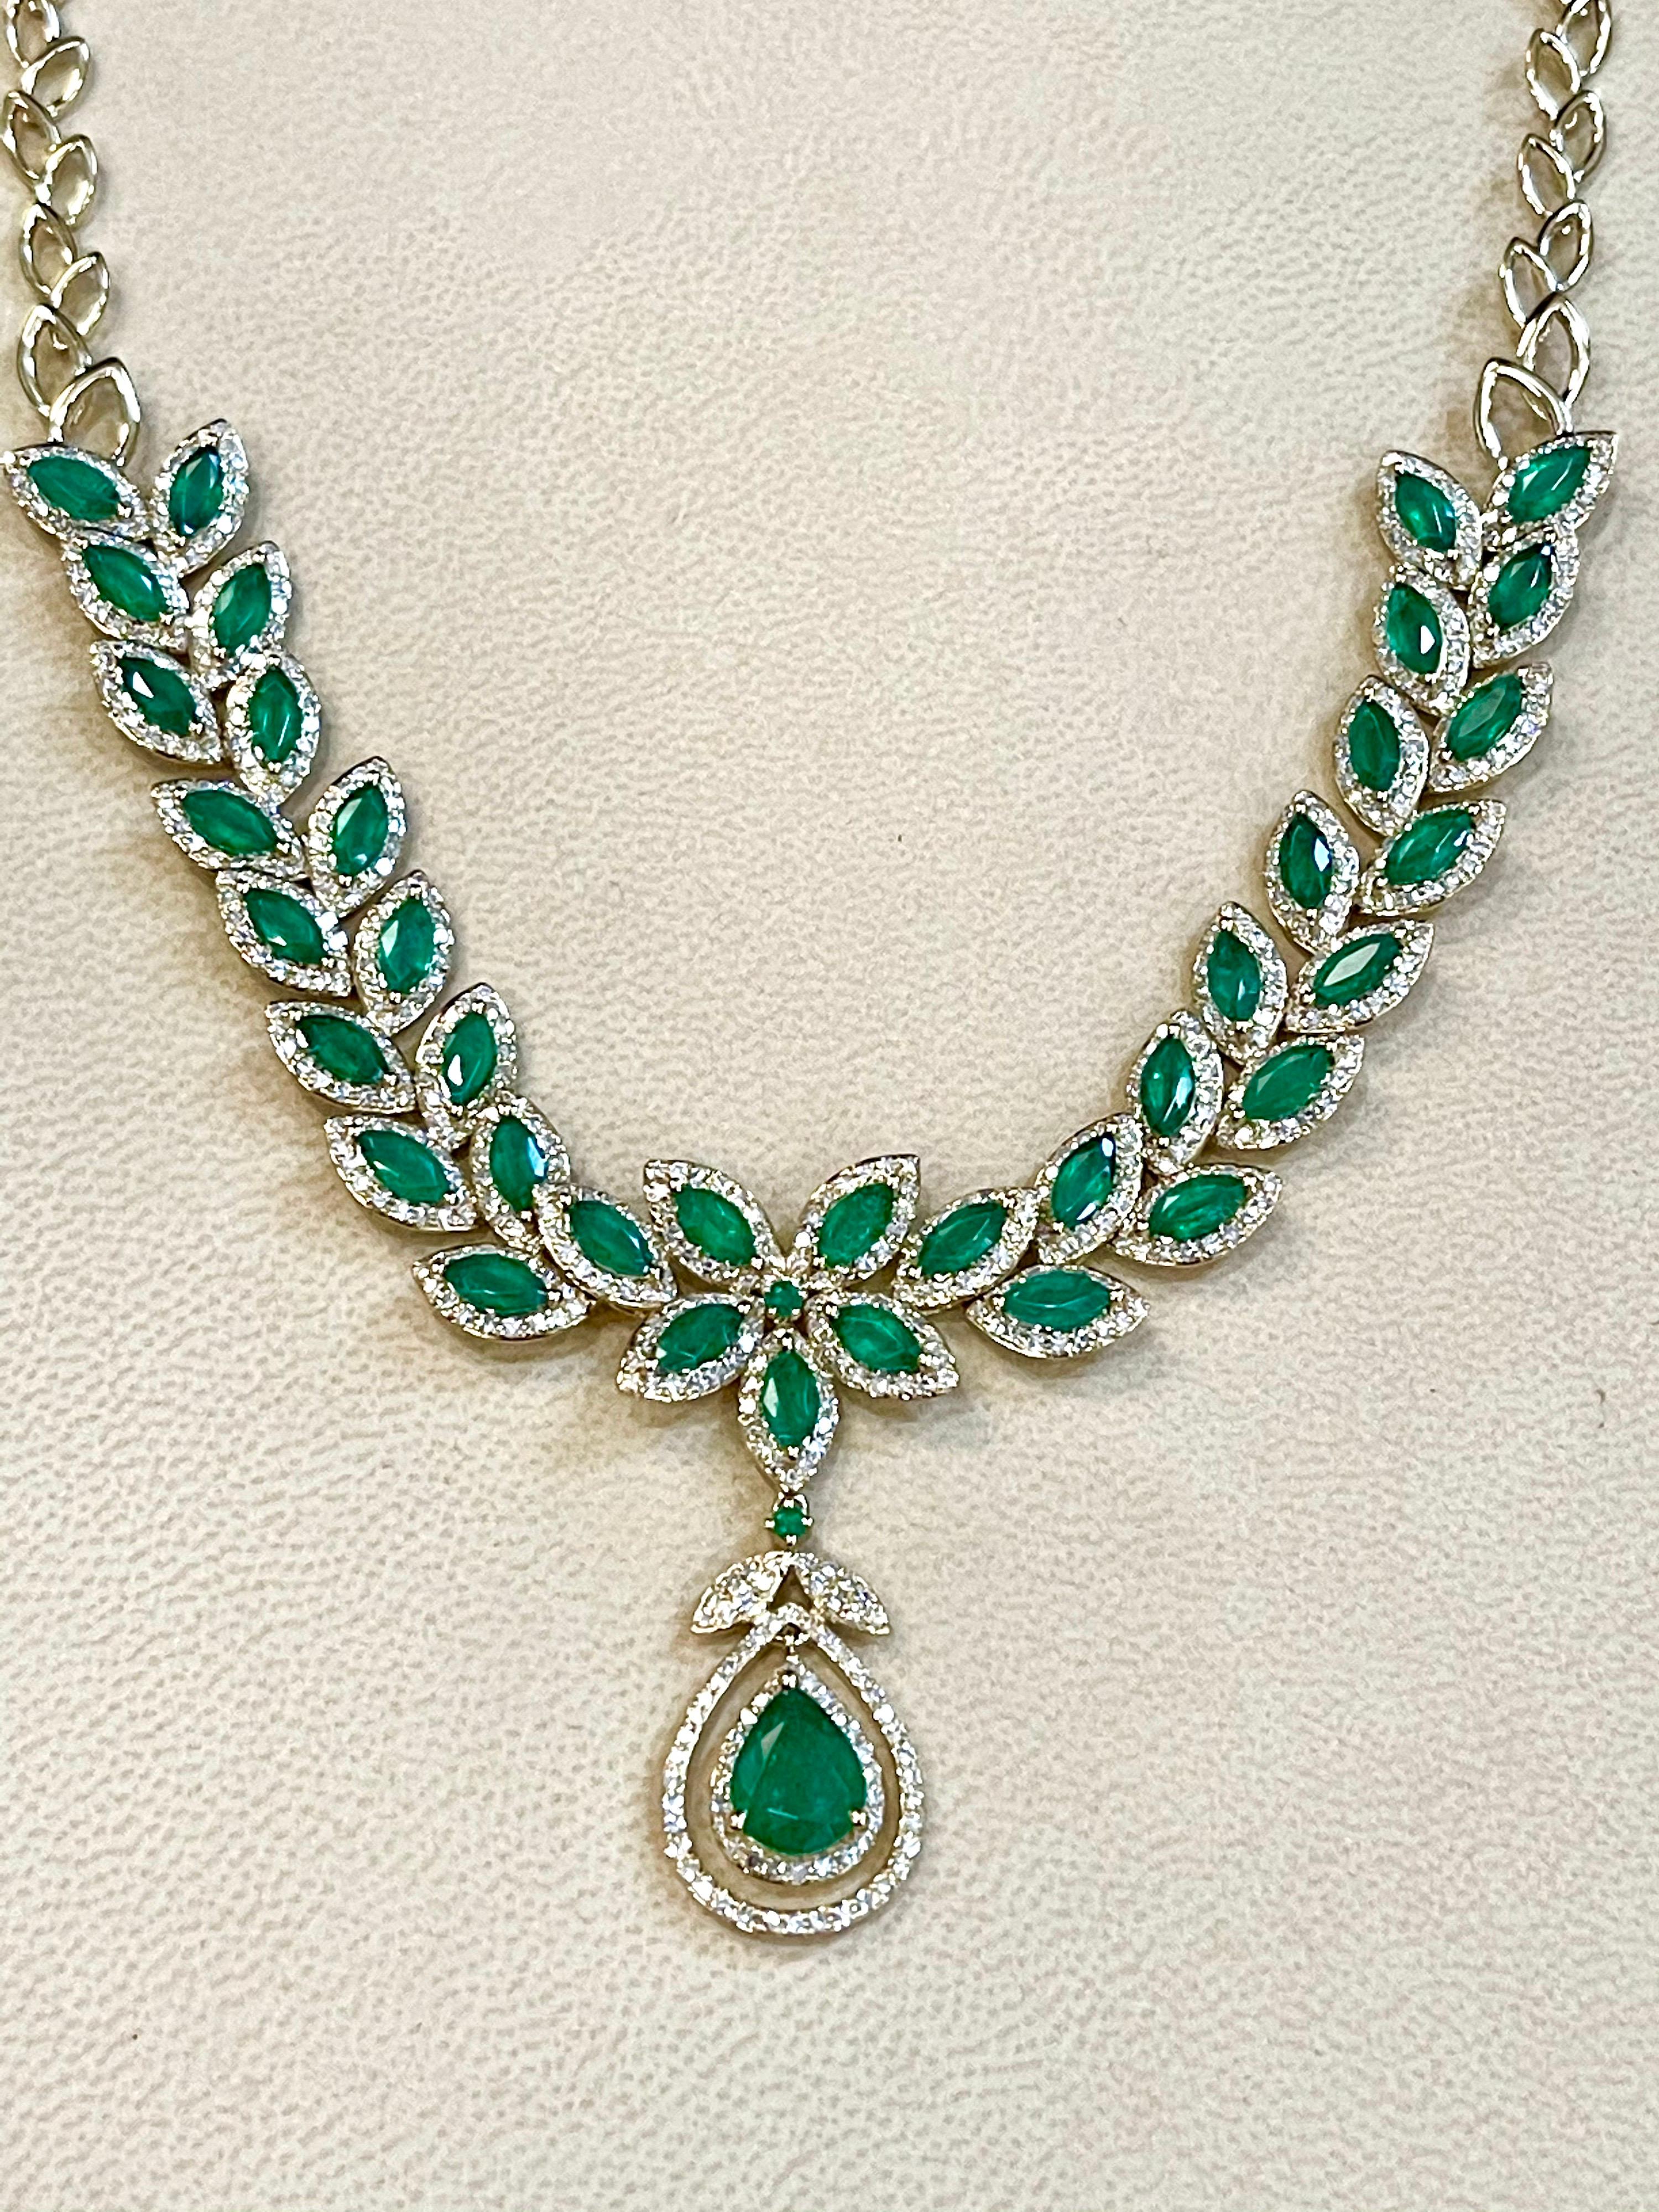 Designer Effy's 12 Carat Marquise Emerald &  2.76 Carat Diamond Necklace in 14 Karat Yellow Gold
This Simple yet elegant Necklace  consisting of a single pear shape emerald 9 X 7  mm dropping as a drop surrounded by two pear made of  brilliant cut